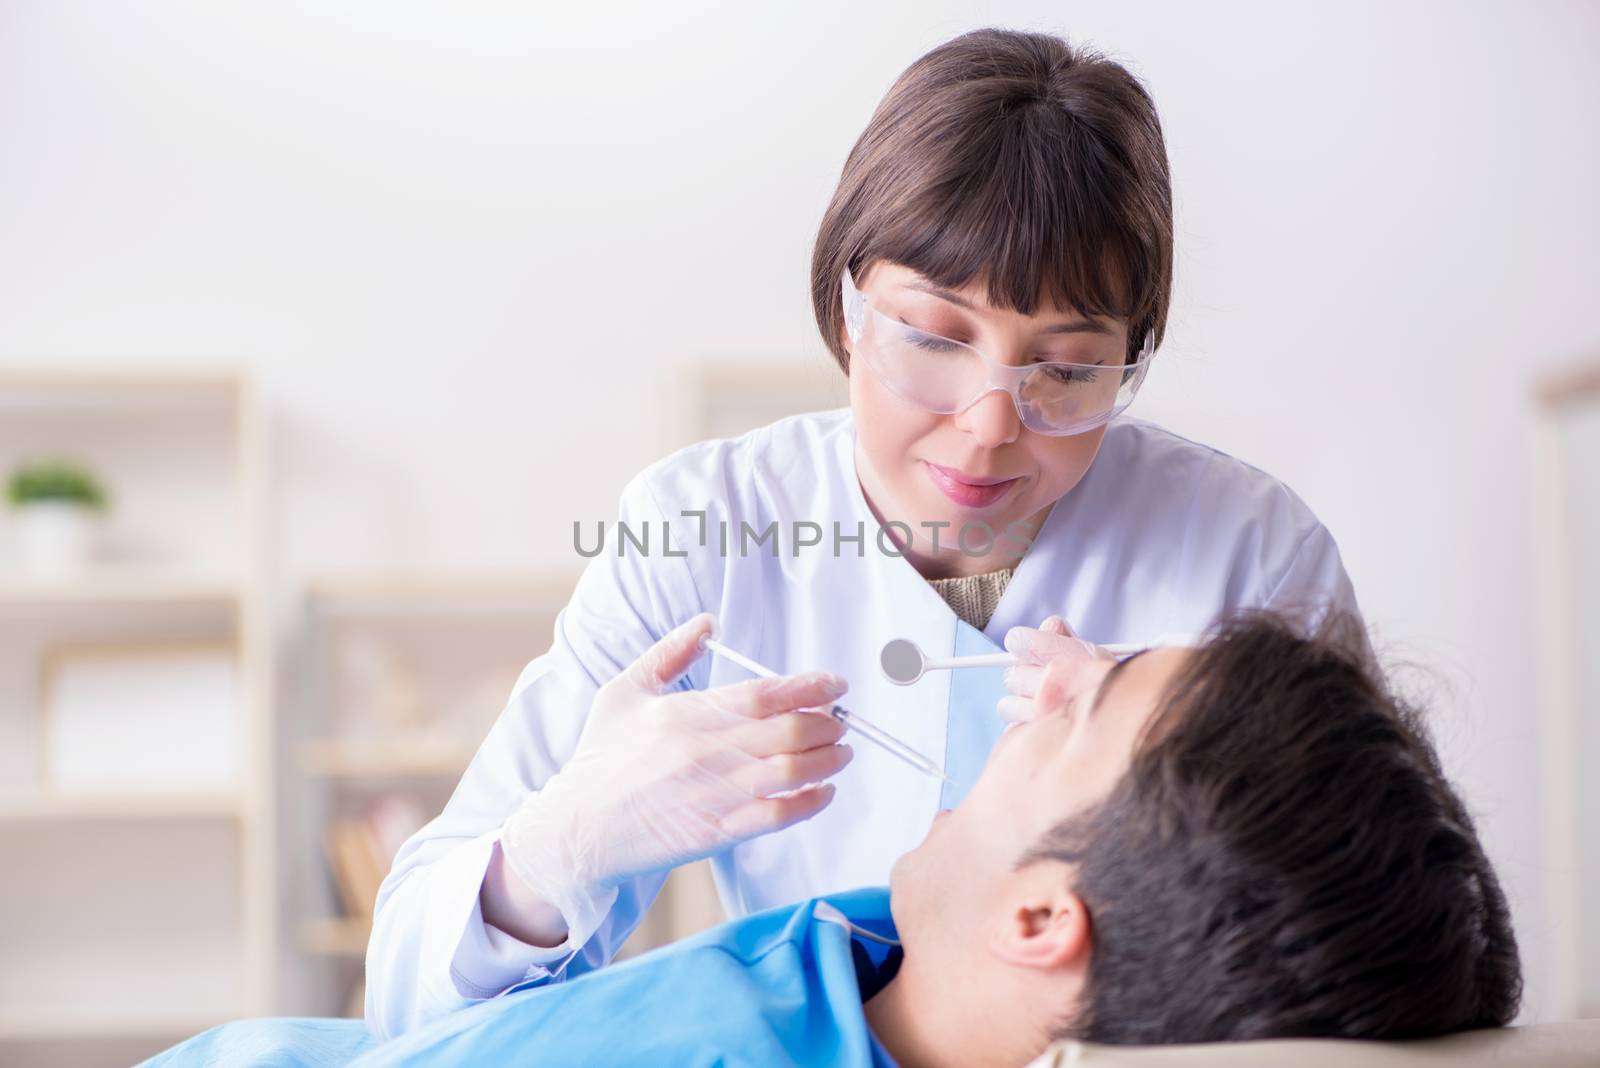 Patient visiting dentist for regular check-up and filling by Elnur